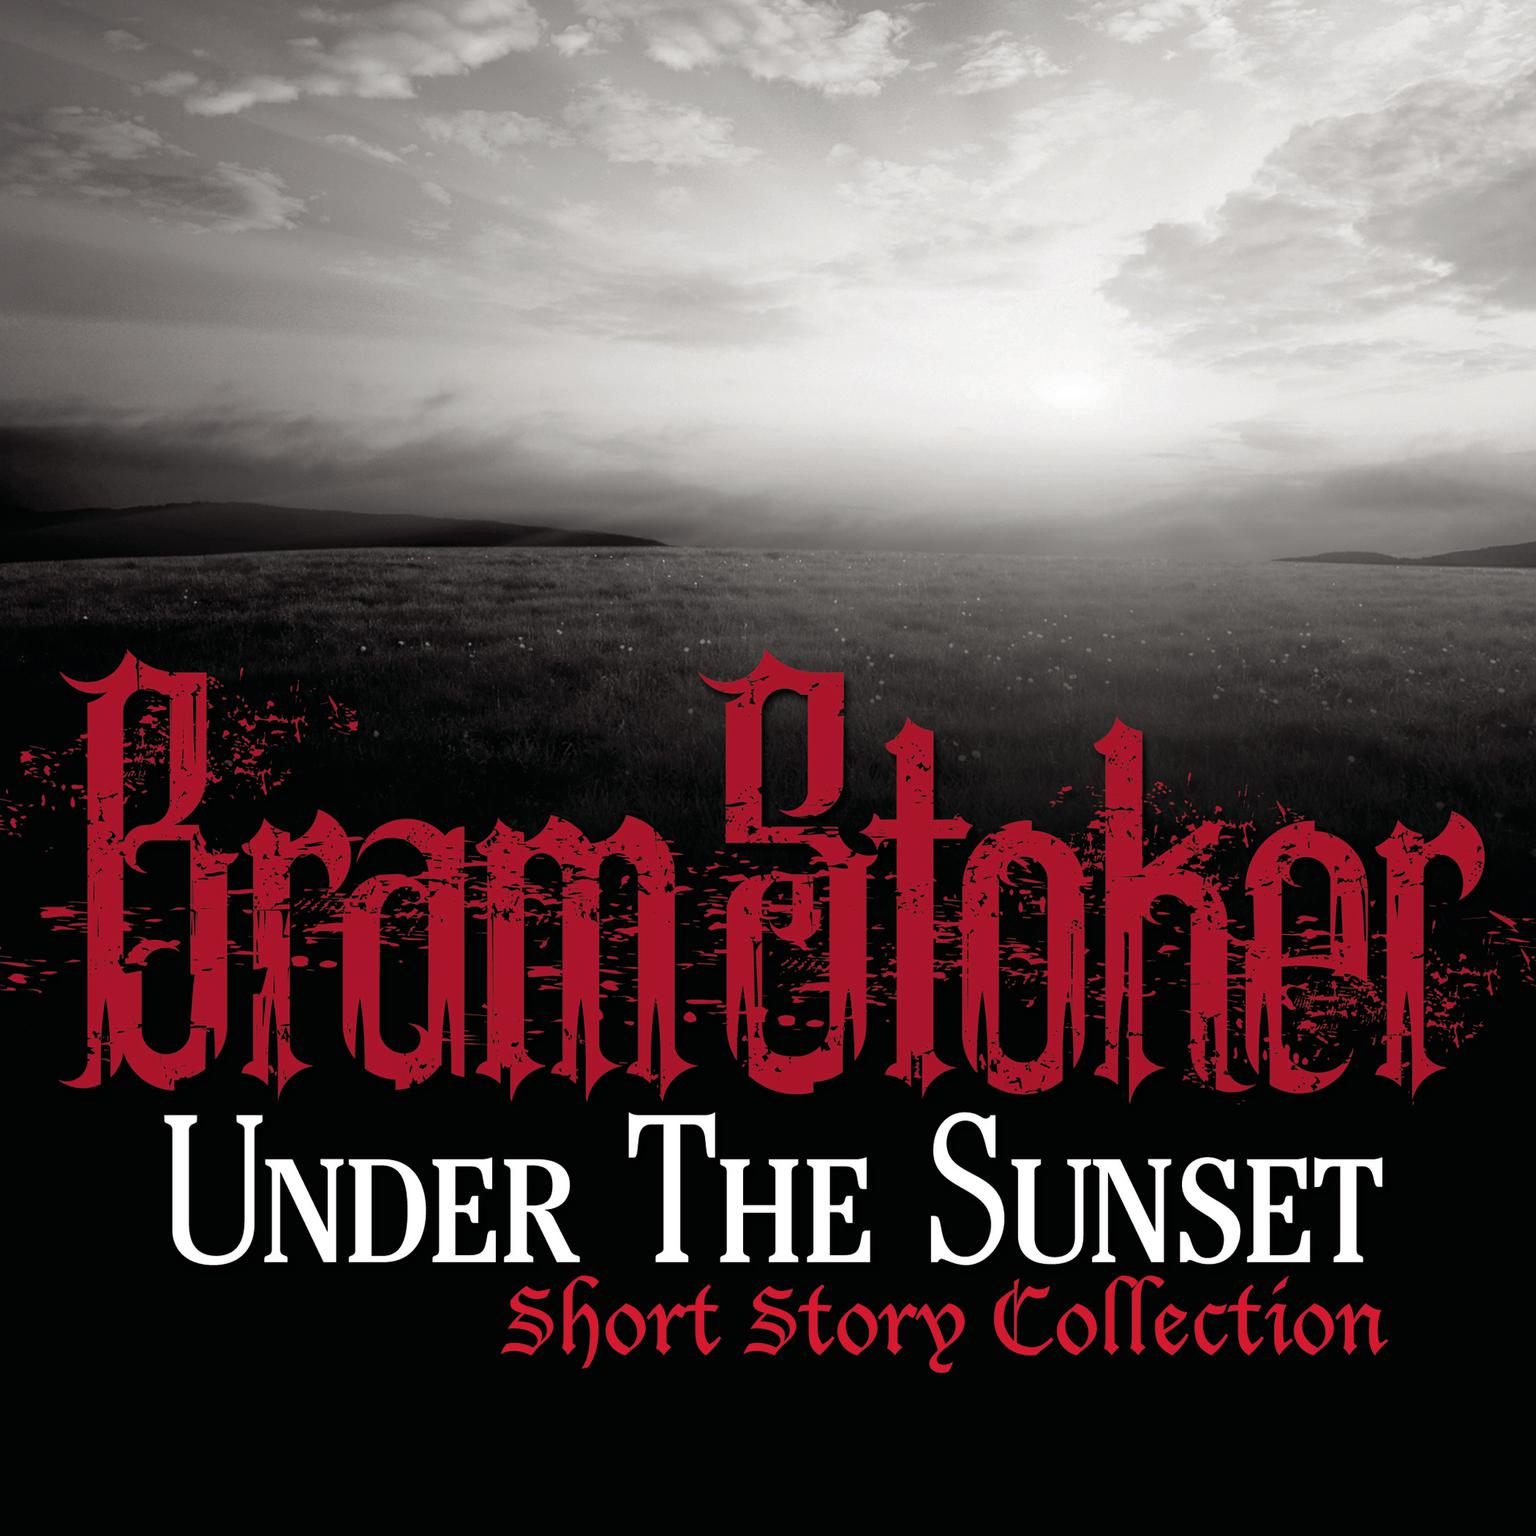 Under The Sunset Short Story Collection Audiobook, by Bram Stoker